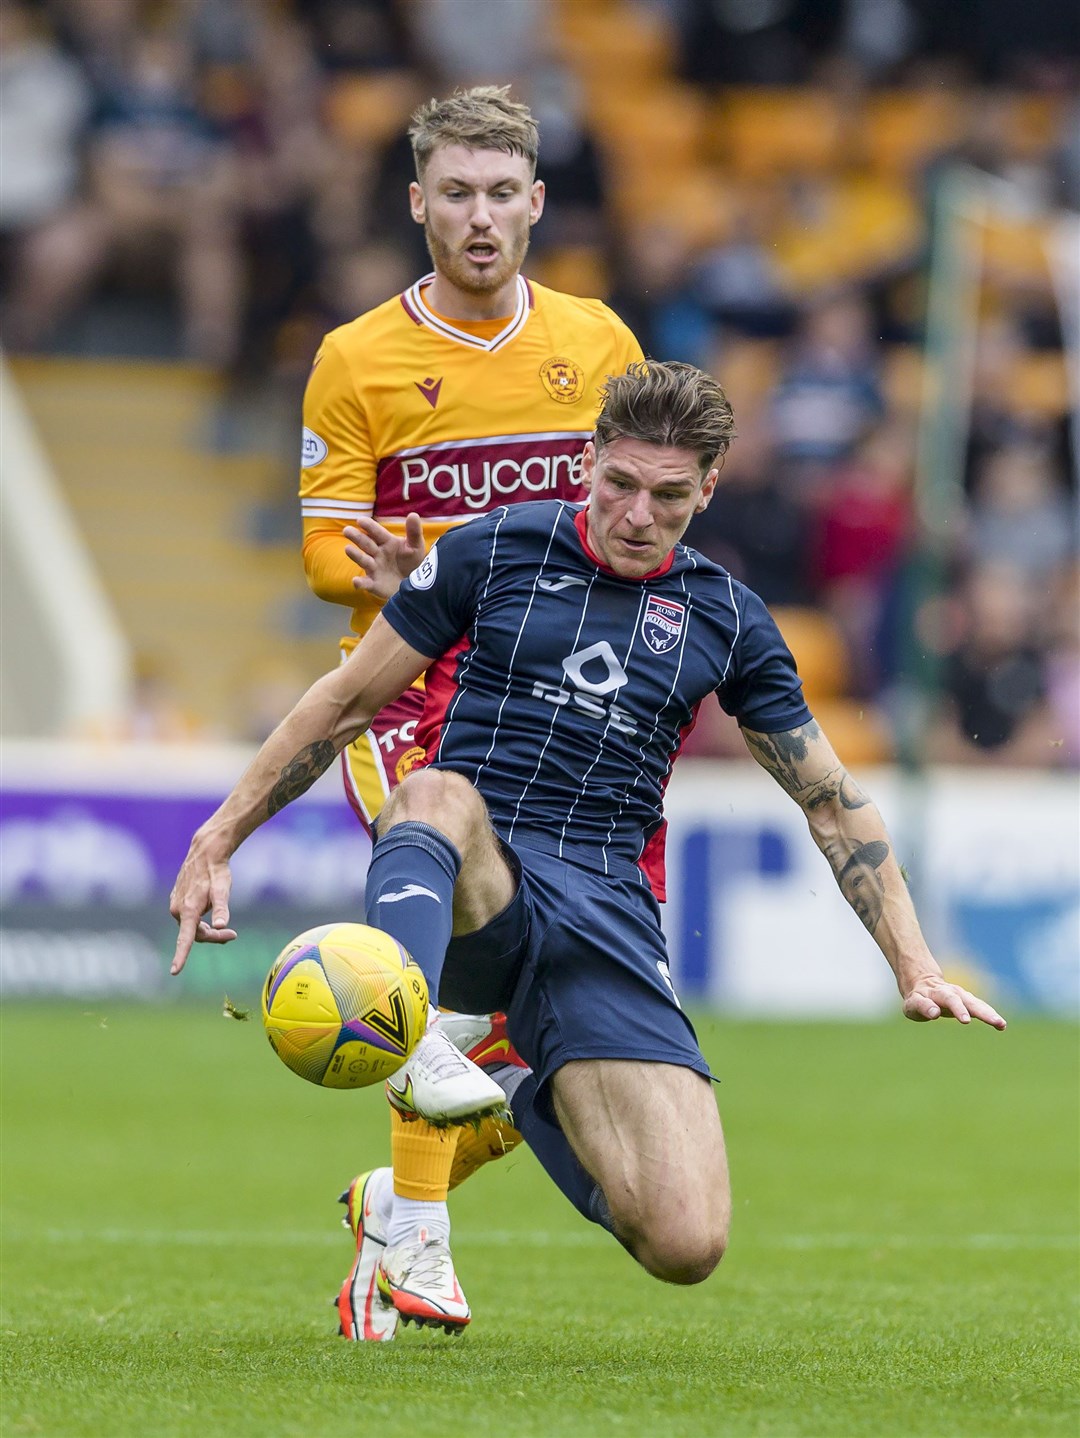 Picture - Kenny Ramsay. 25.09.2021 Motherwell v Ross County. Ross County's Ross Callachan holds off Motherwell's Callum Slattery.